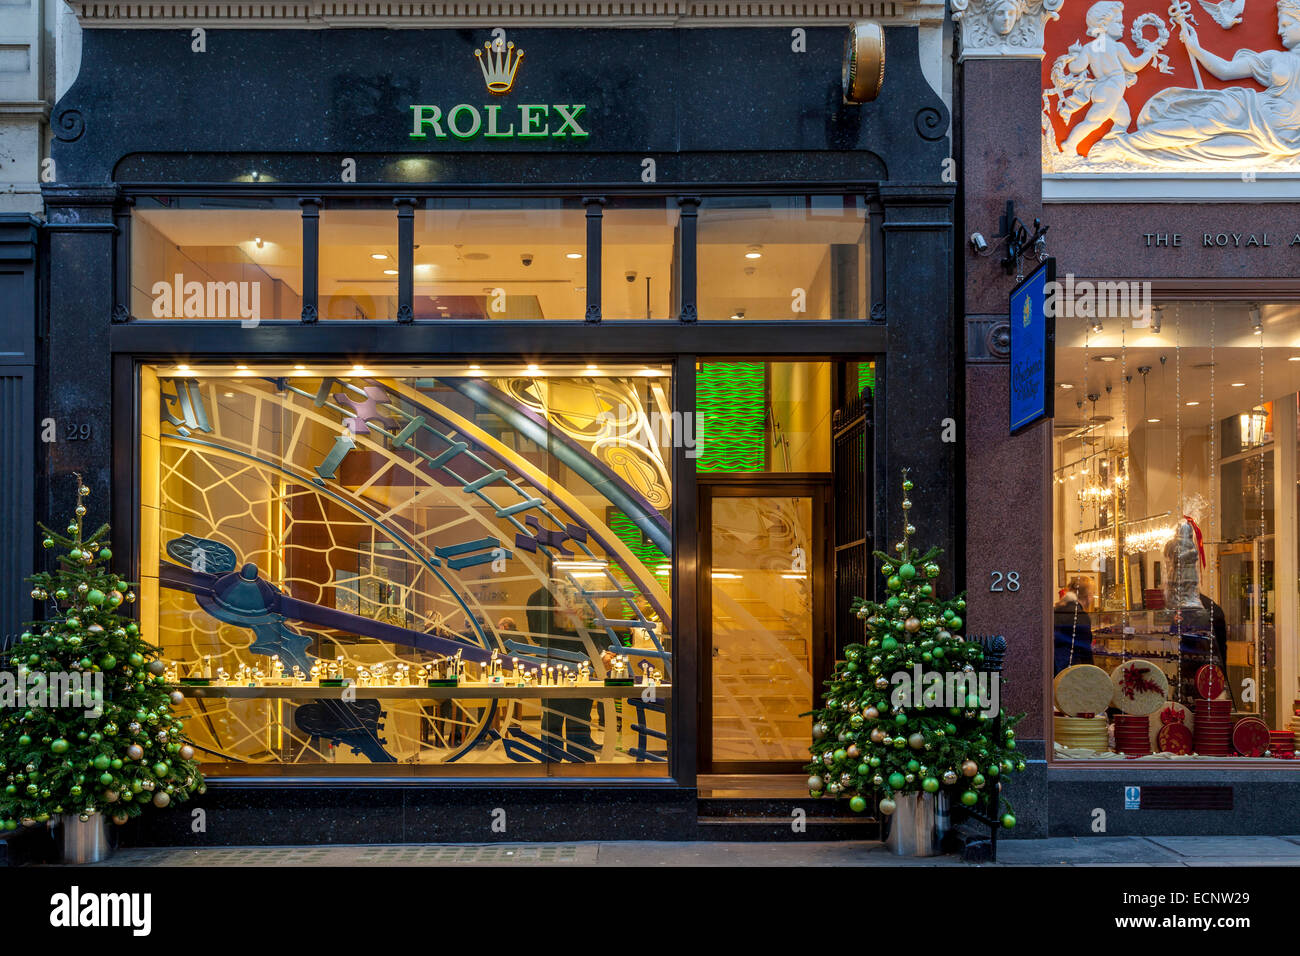 Rolex Window Display High Resolution Stock Photography and Images - Alamy